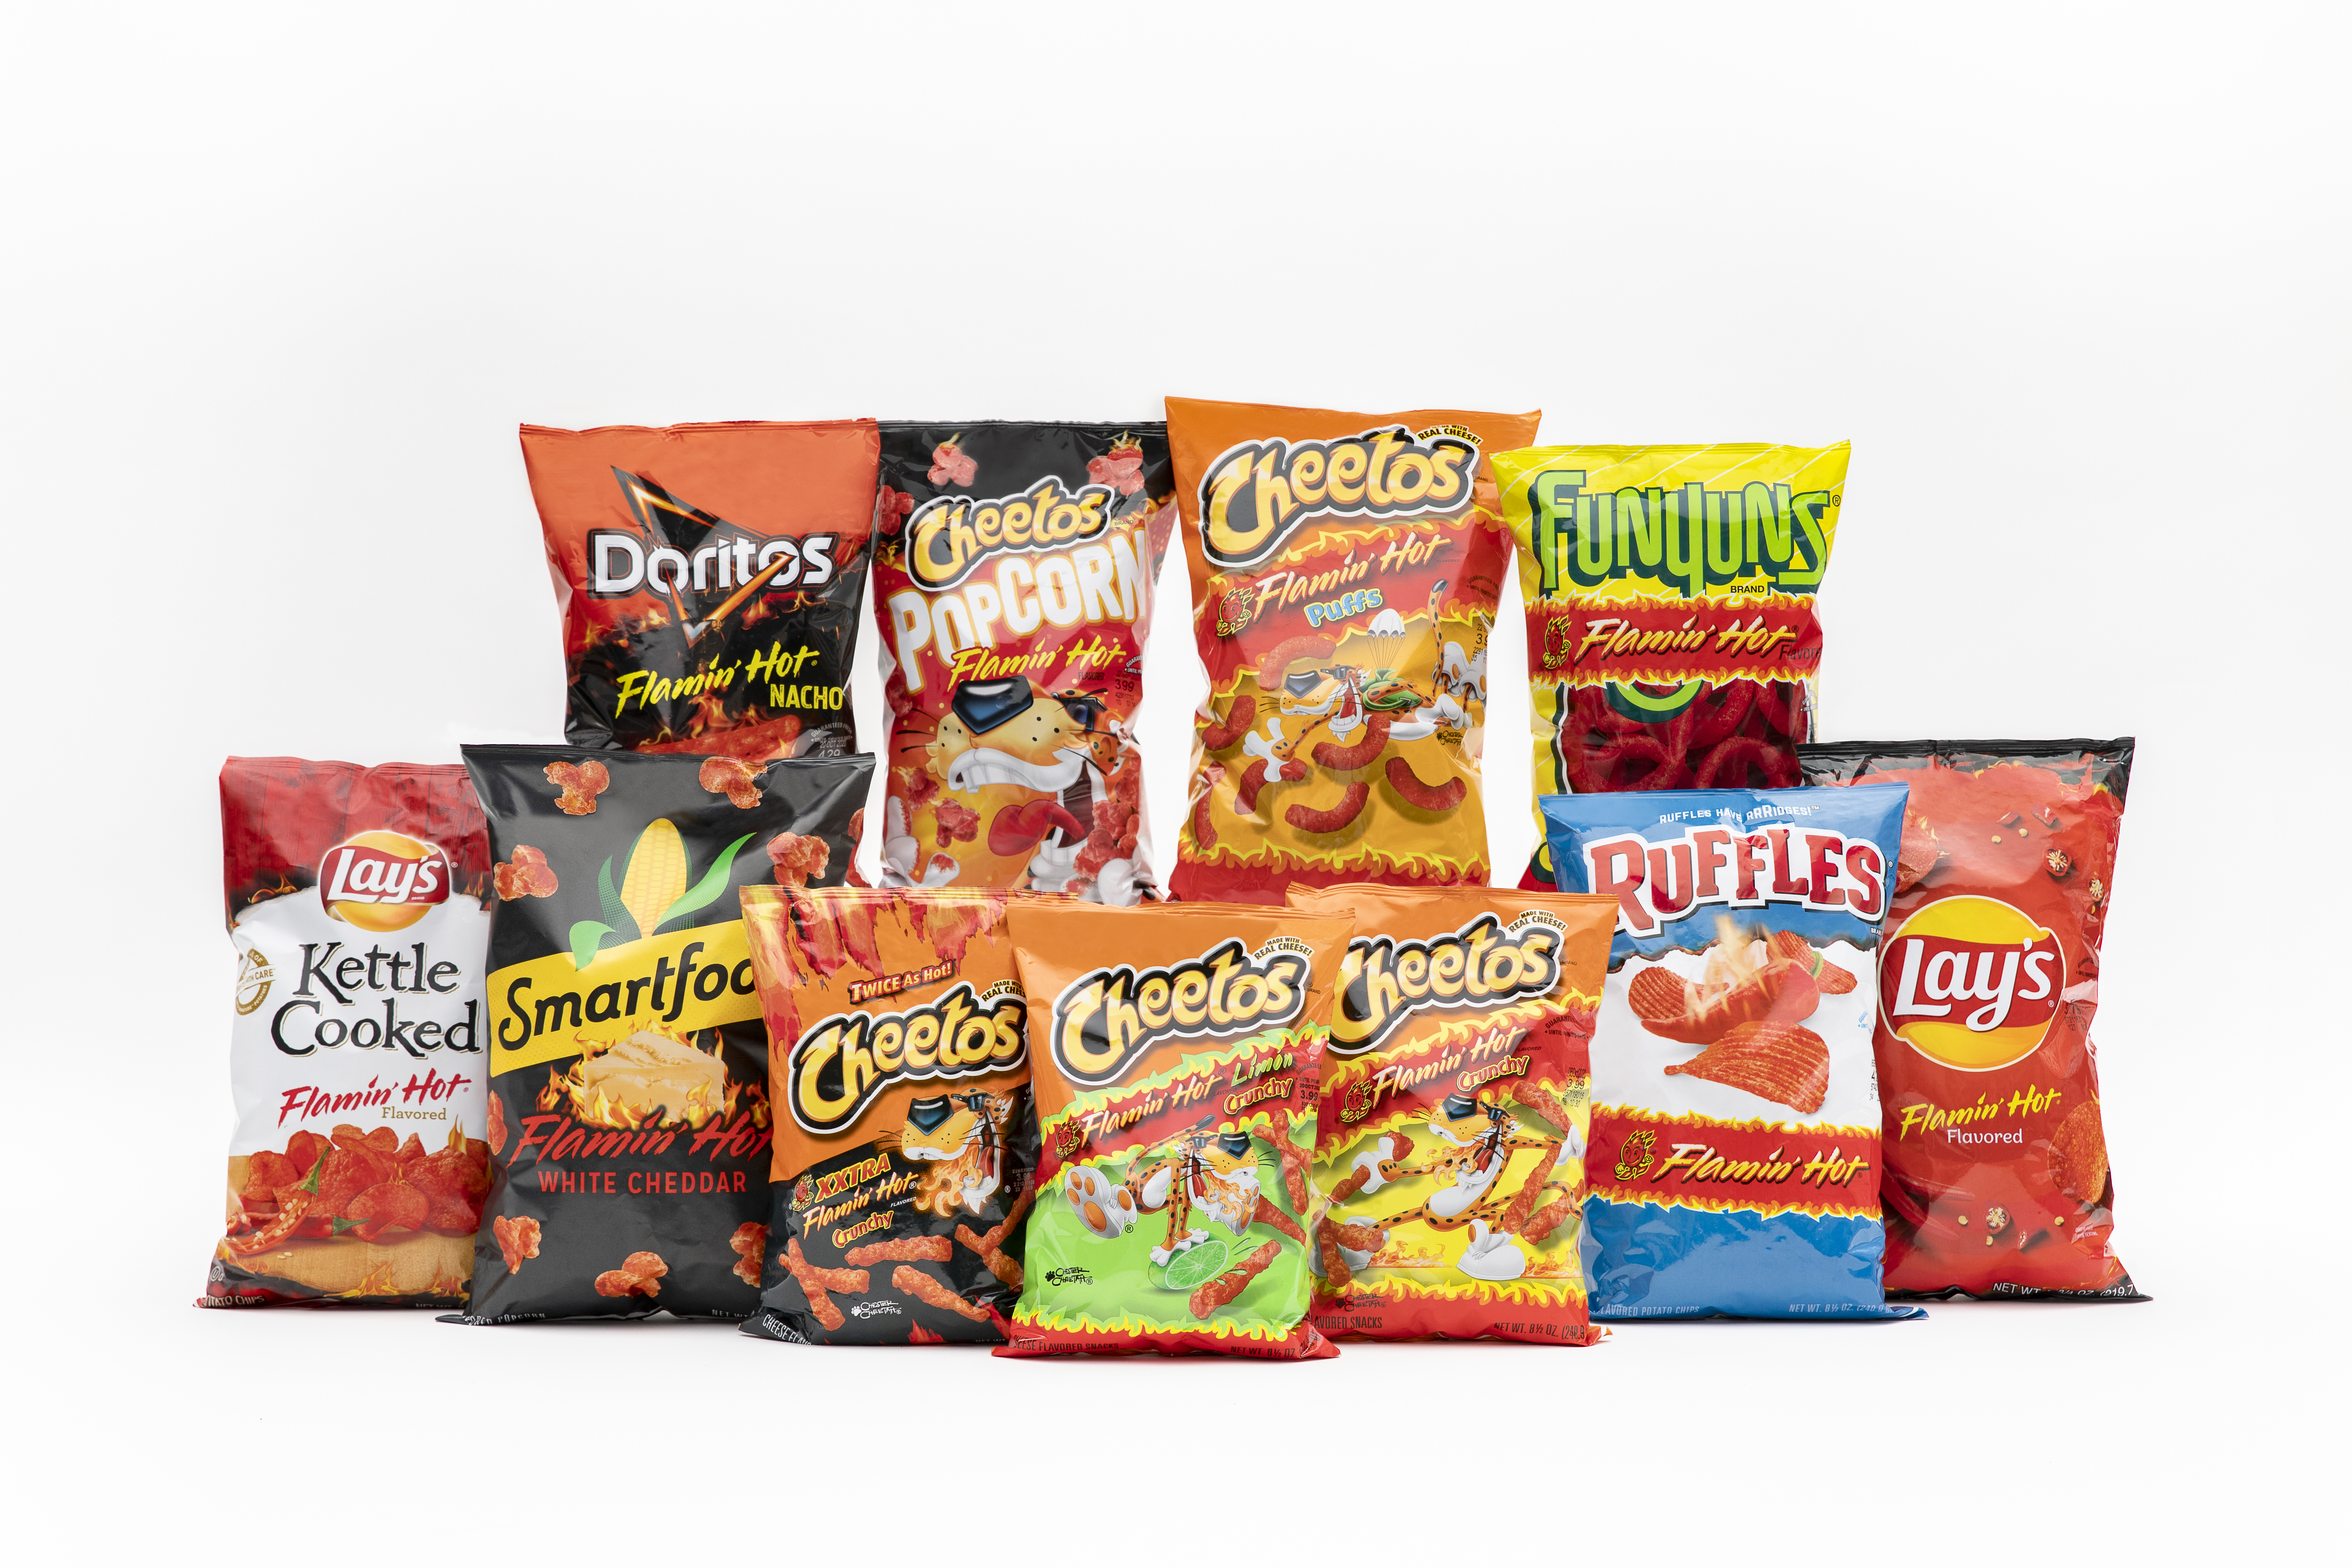 A selection of Flamin’ Hot products, including cheetos, funyuns, and ruffles.